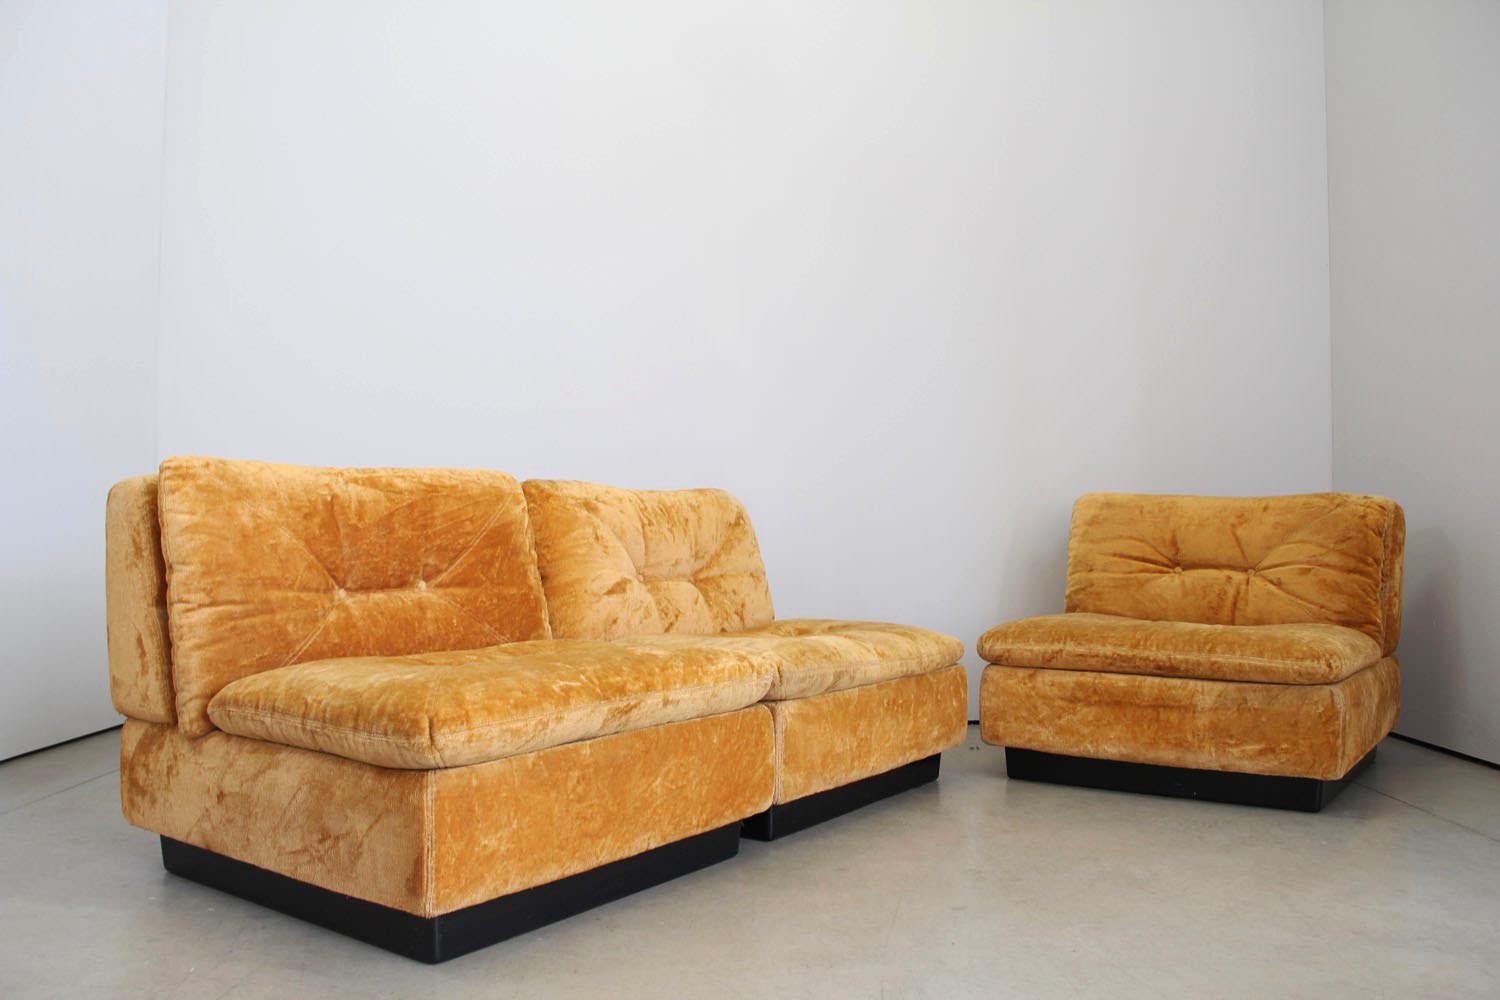 Design from the 1970s.
This sofa from Saporiti Italia has a orange/ yellow soft velour fabric.
The sofa consist 3 modules that can arrange to a 3-seat sofa or as a 2-seat sofa and a chair.
Good condition.

Dimensions:
Module
Width 83